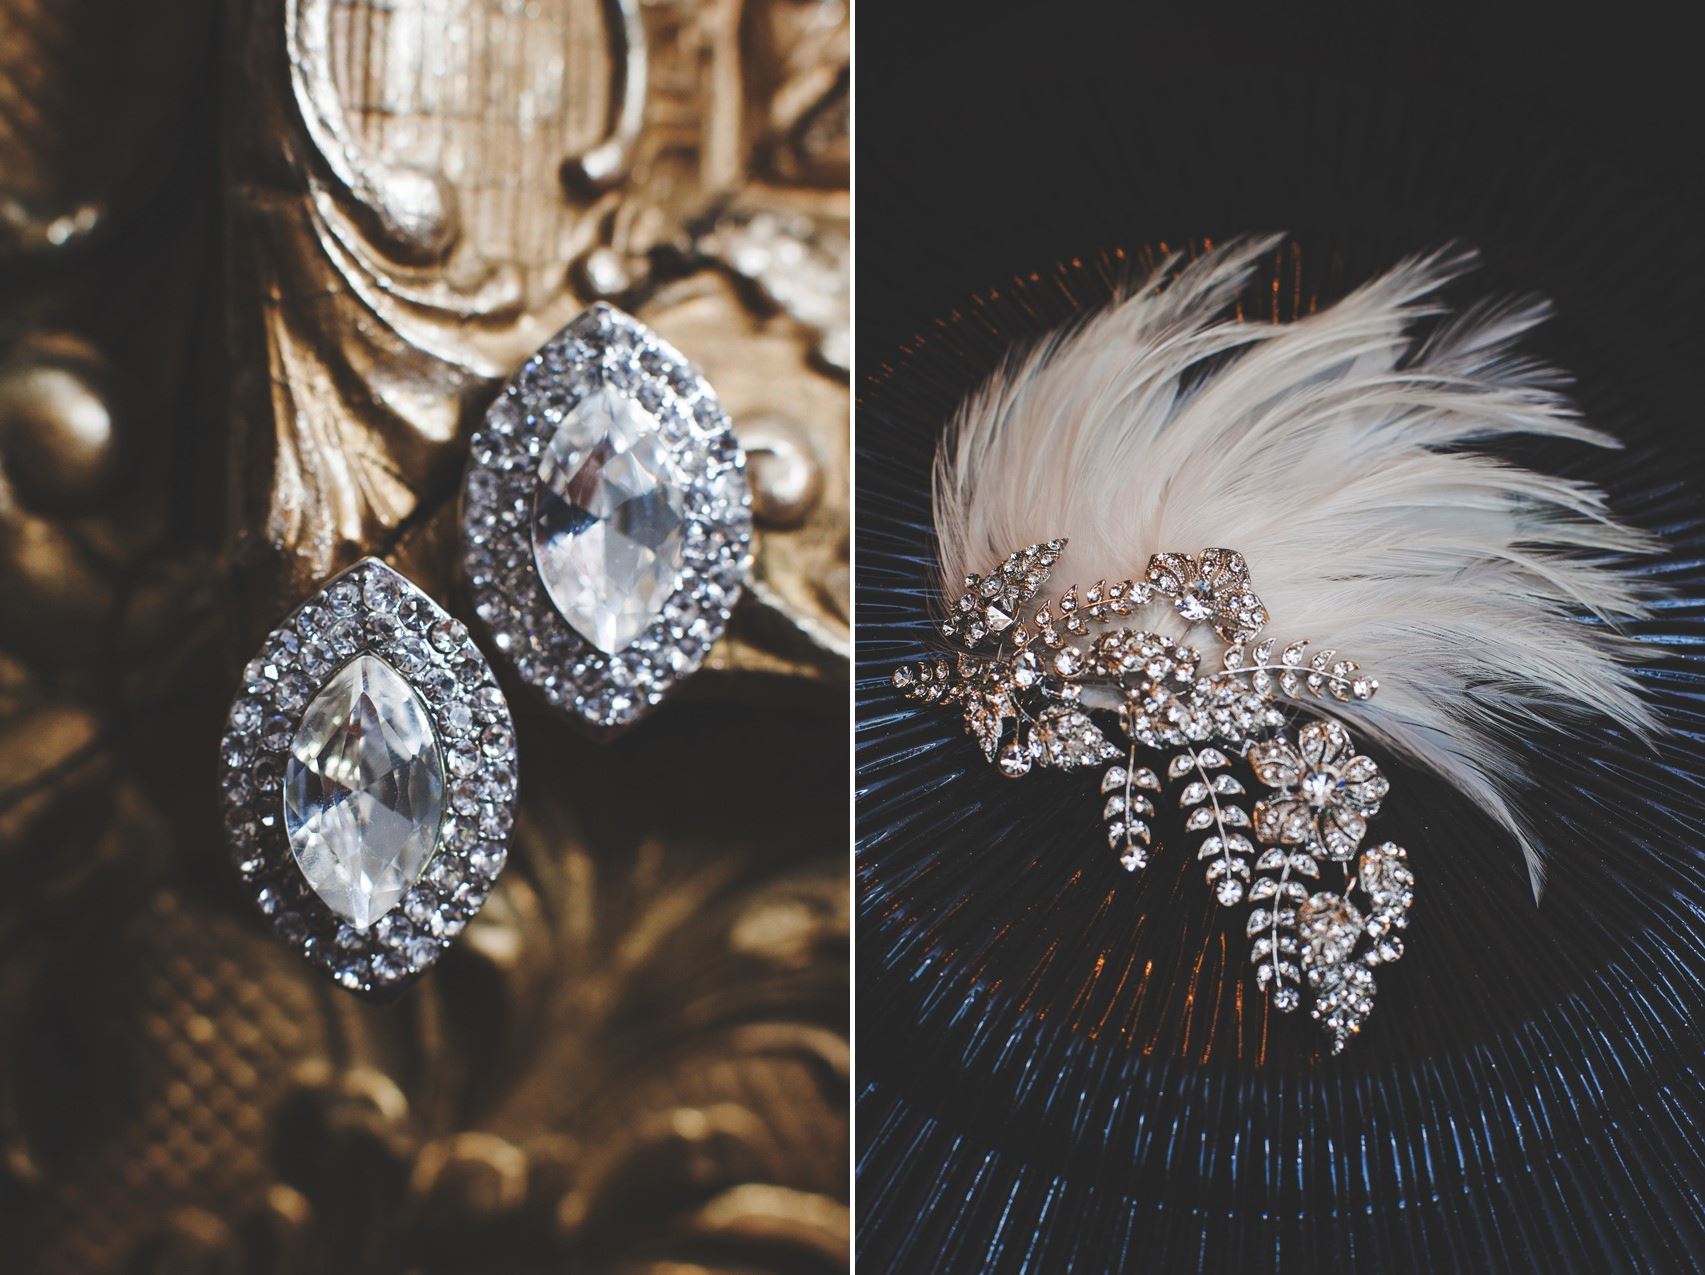 Art Deco Bridal Accessories - A 1920s Speakeasy-Inspired Wedding Styled Shoot